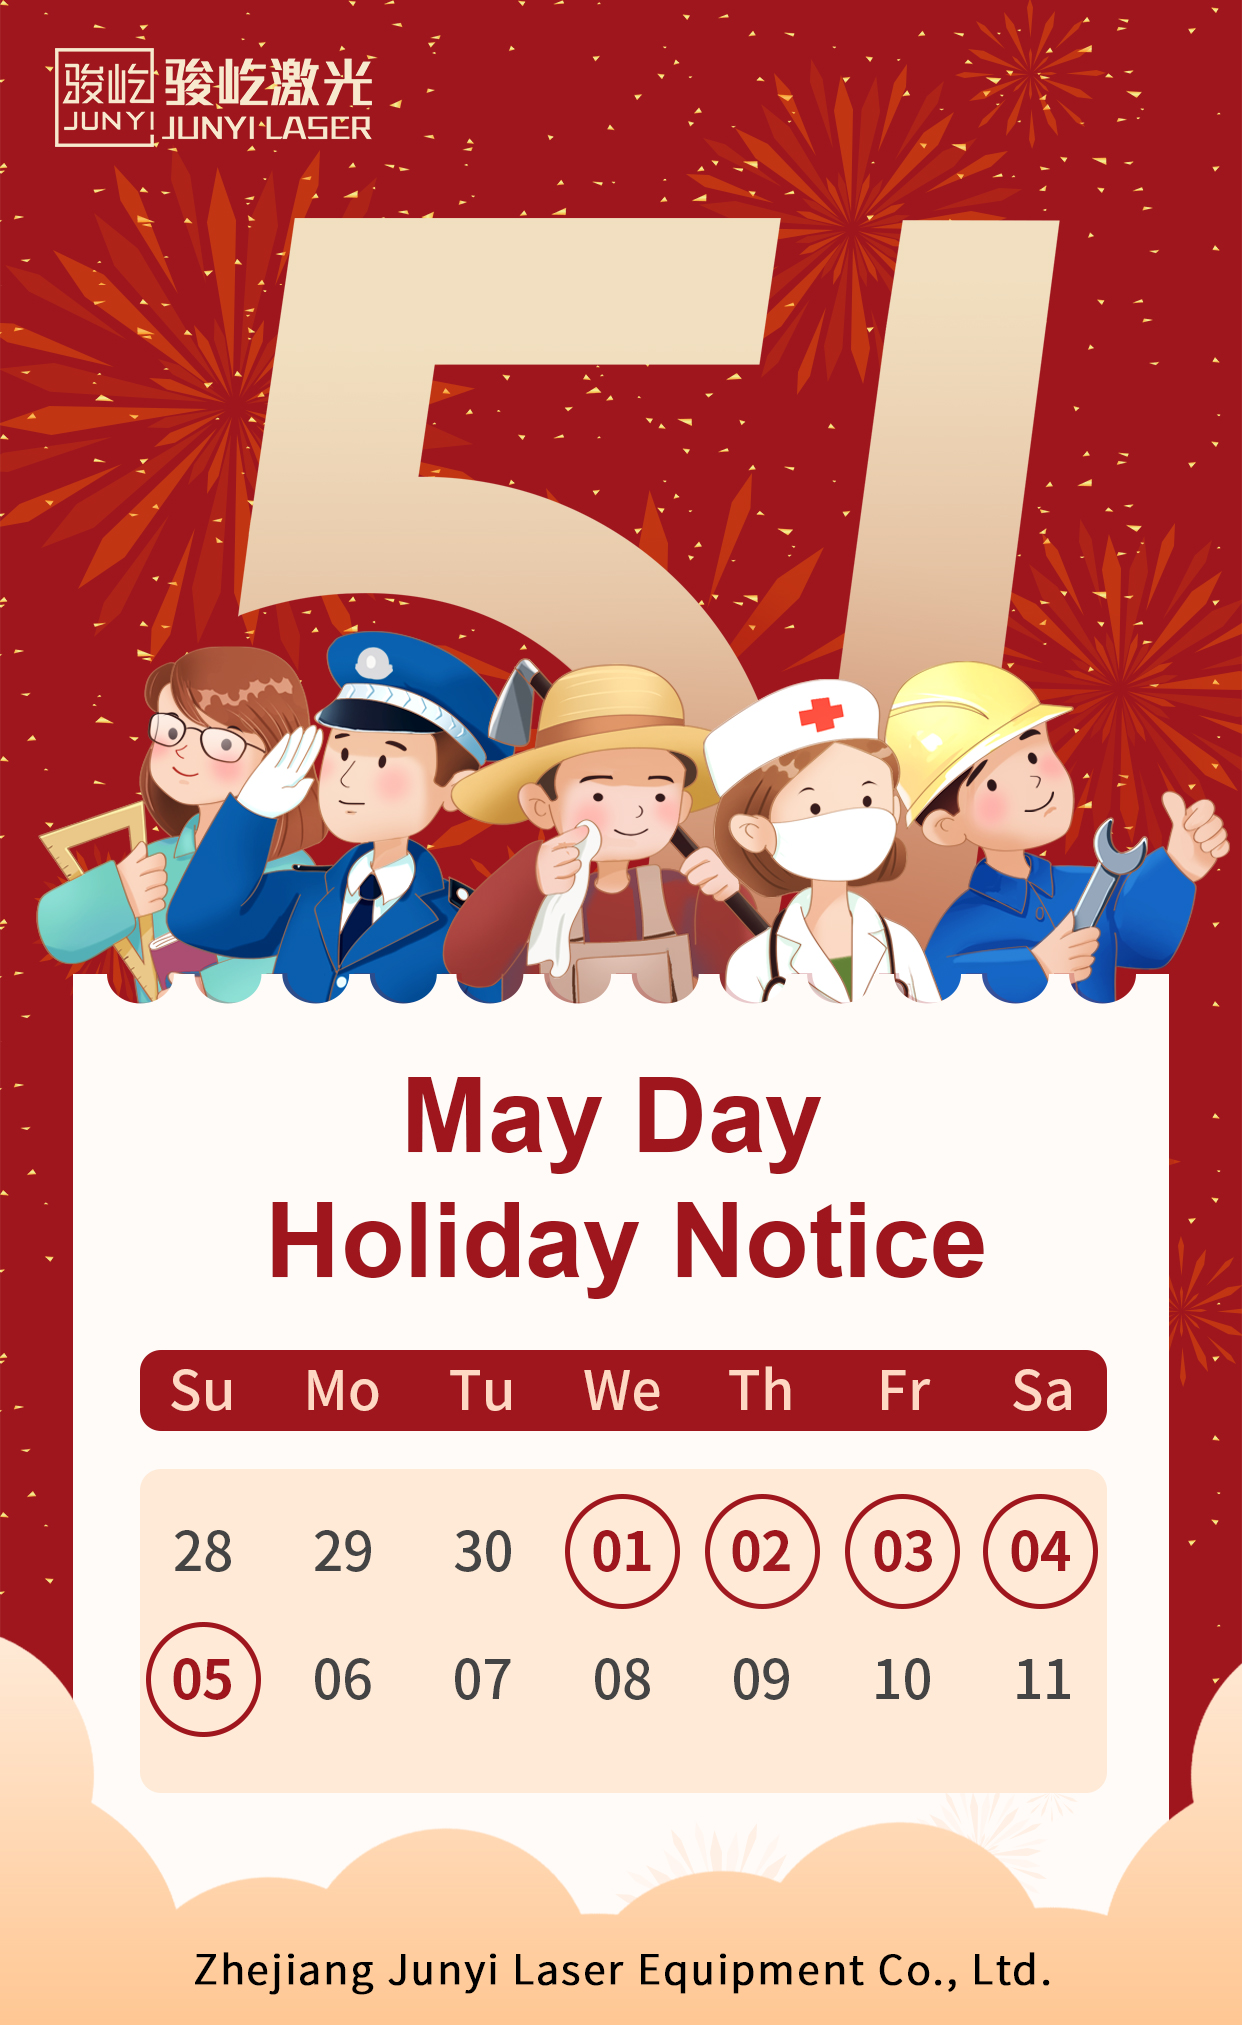 Labour Day Holiday Notification